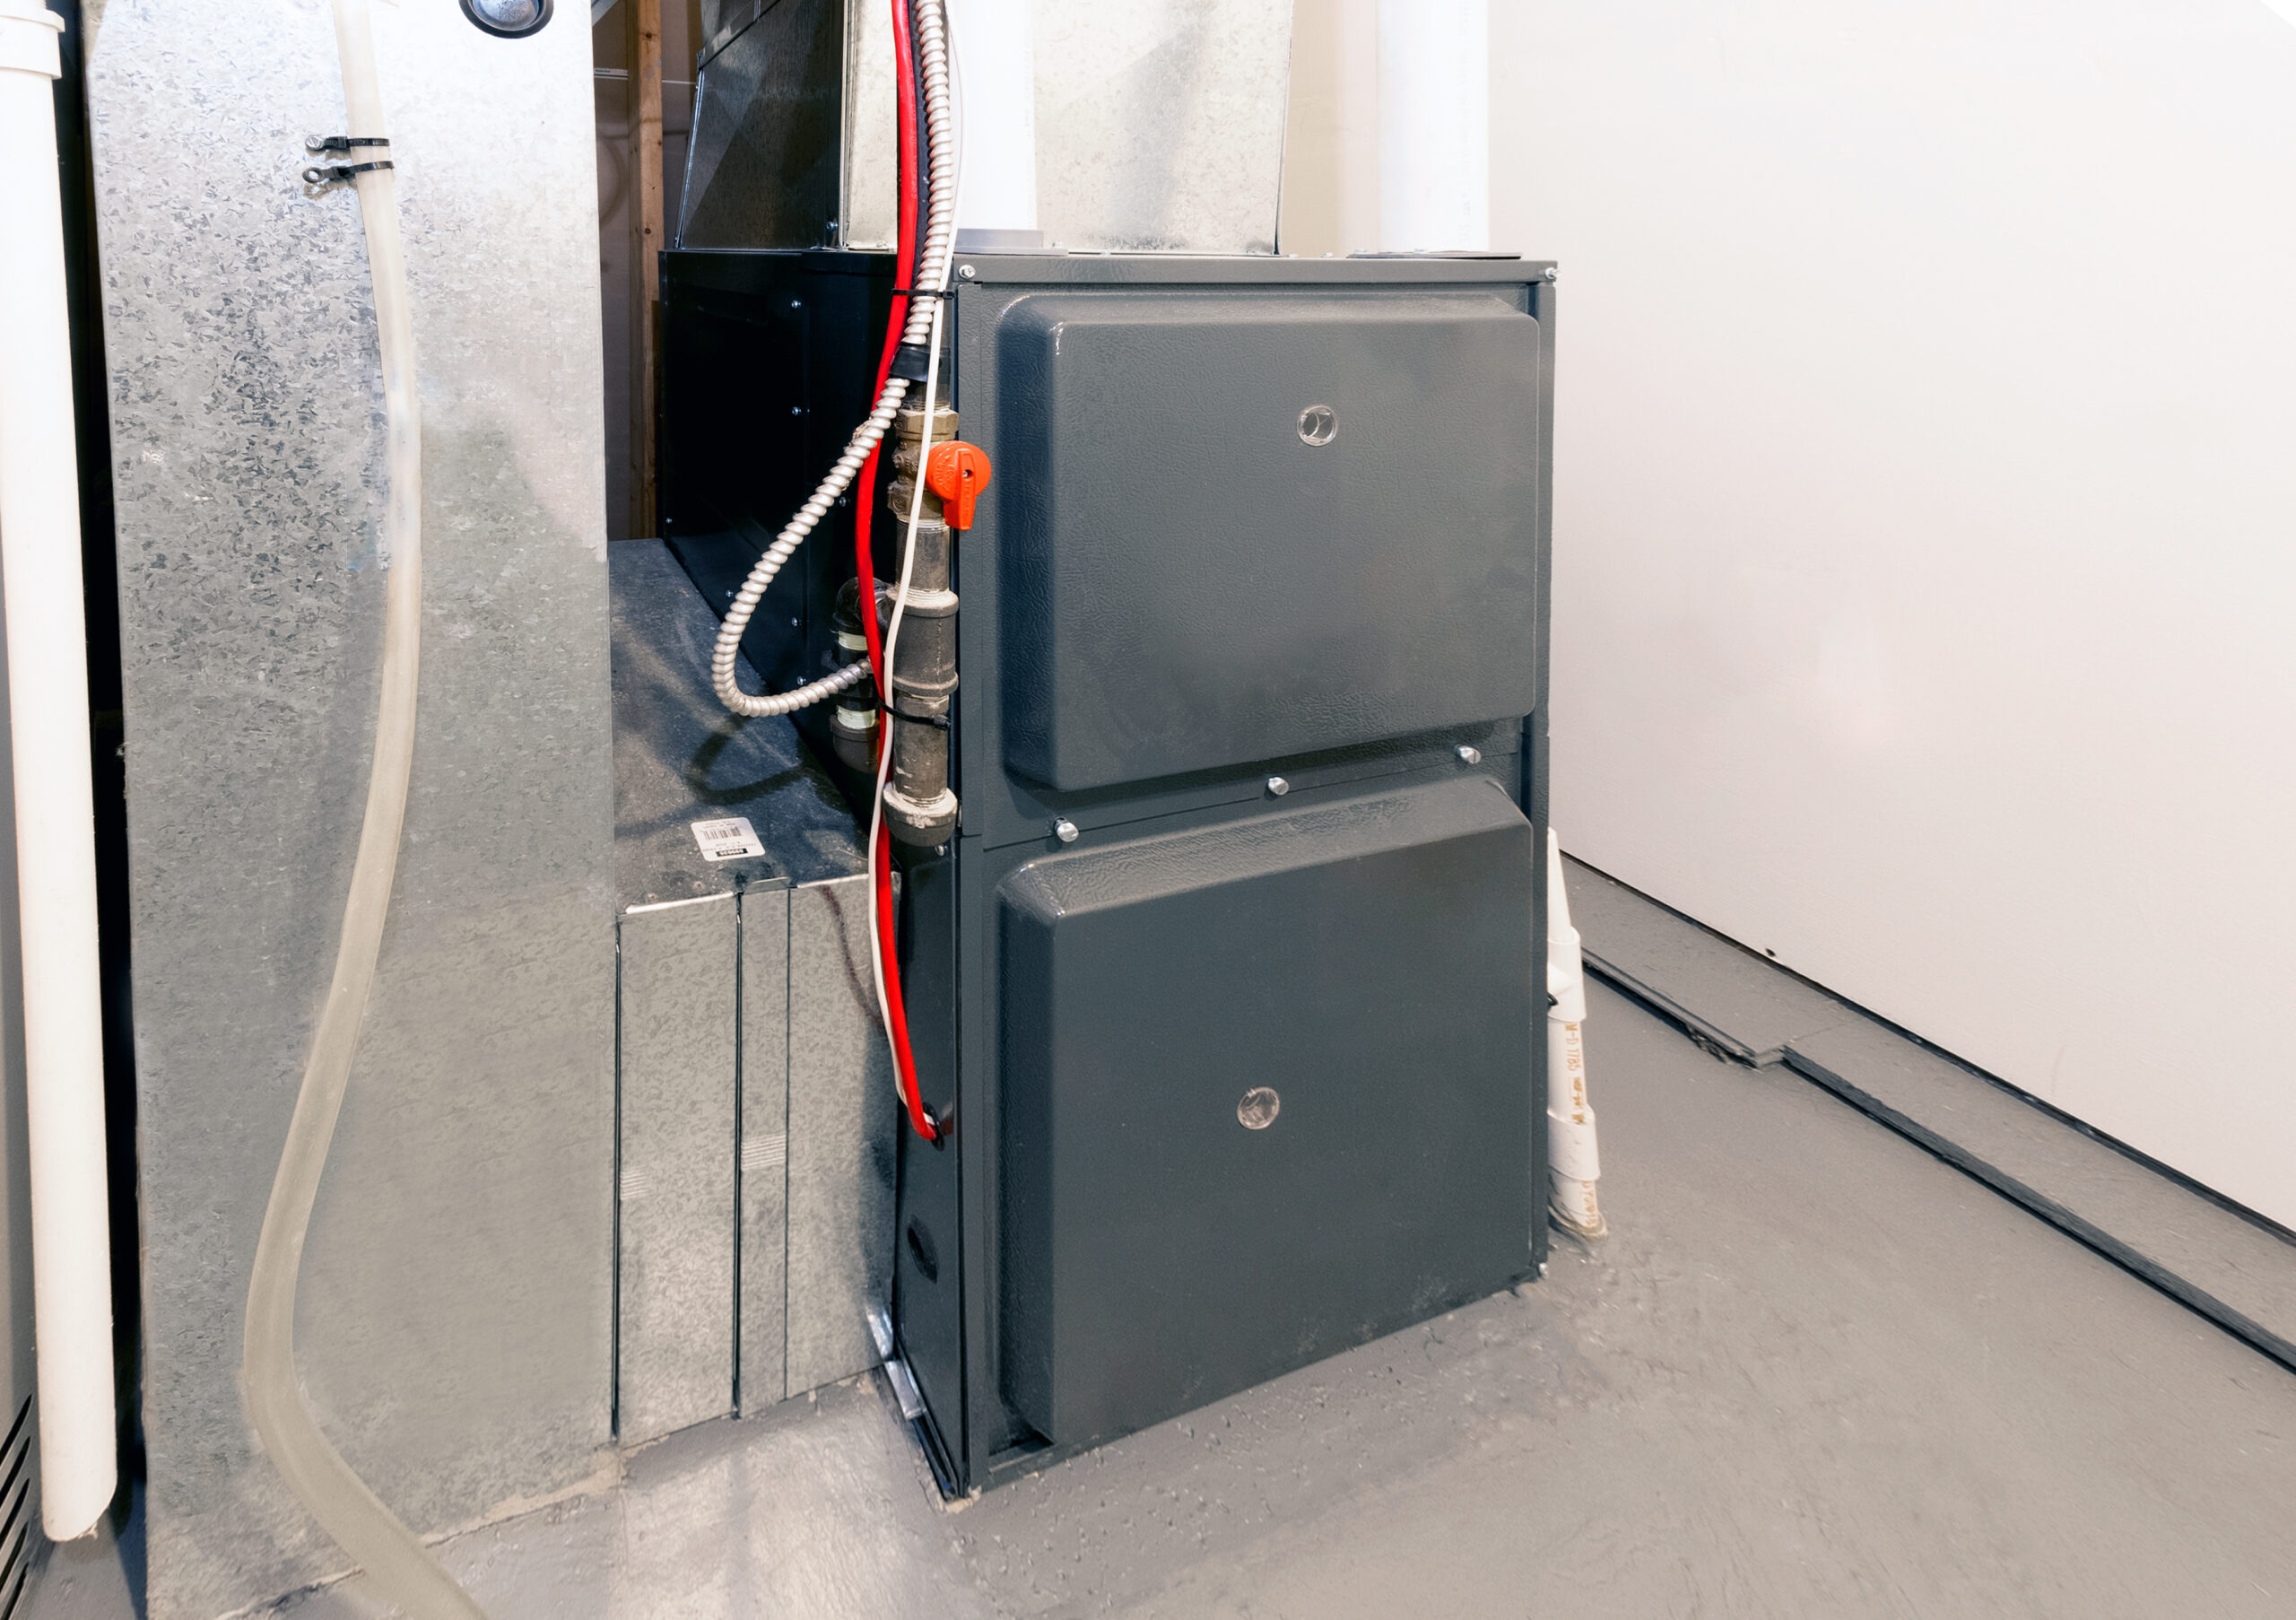 Electric furnace installed in the basement of Grand Rapids home